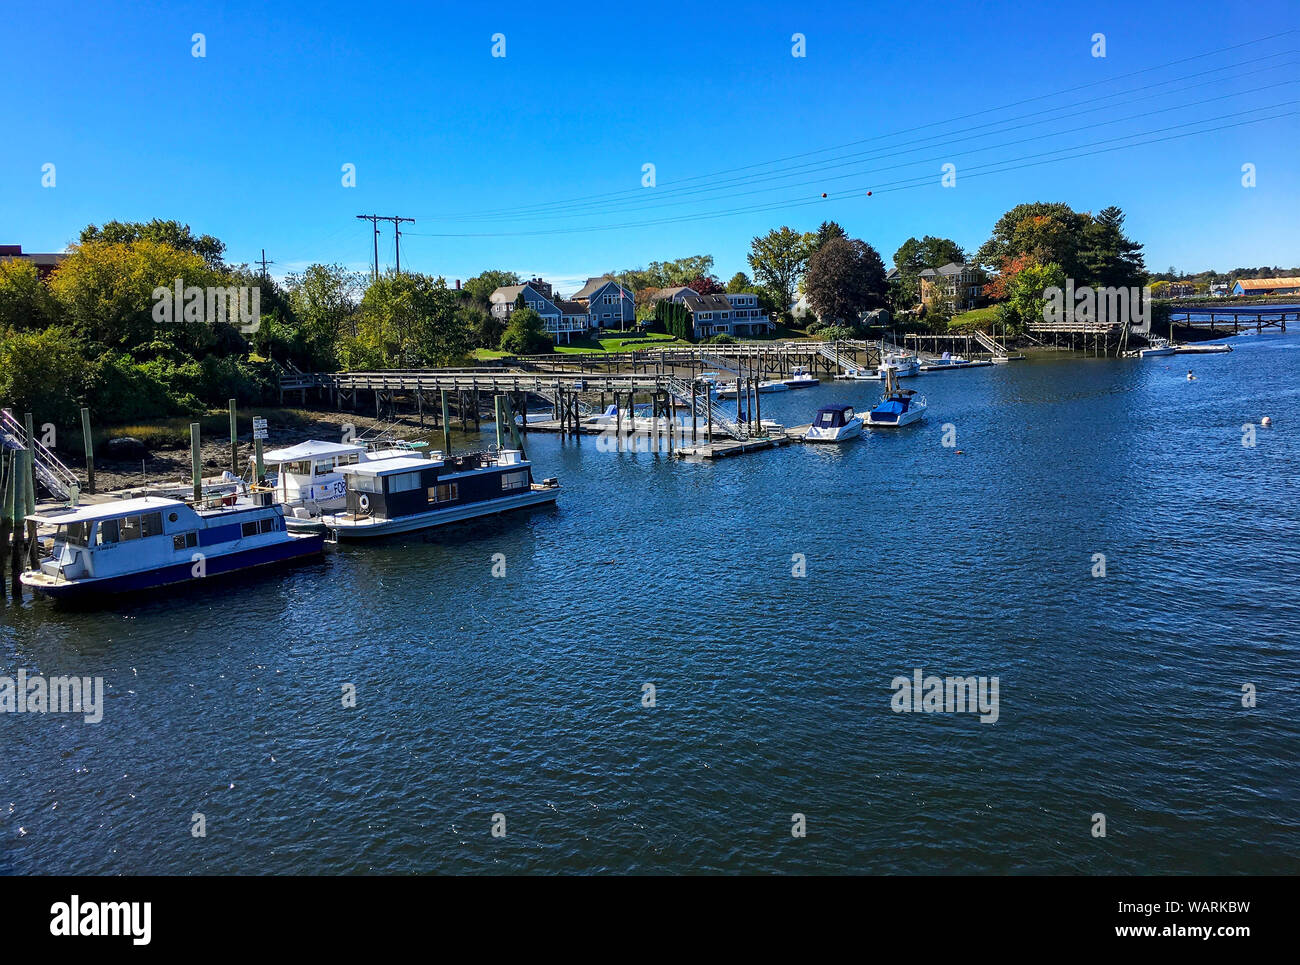 Kittery, Maine / USA - Oct 16 2018: View of the Piscataqua River and Badger's Island taken from Kittery, ME. Docked recreational boats on blue water. Stock Photo